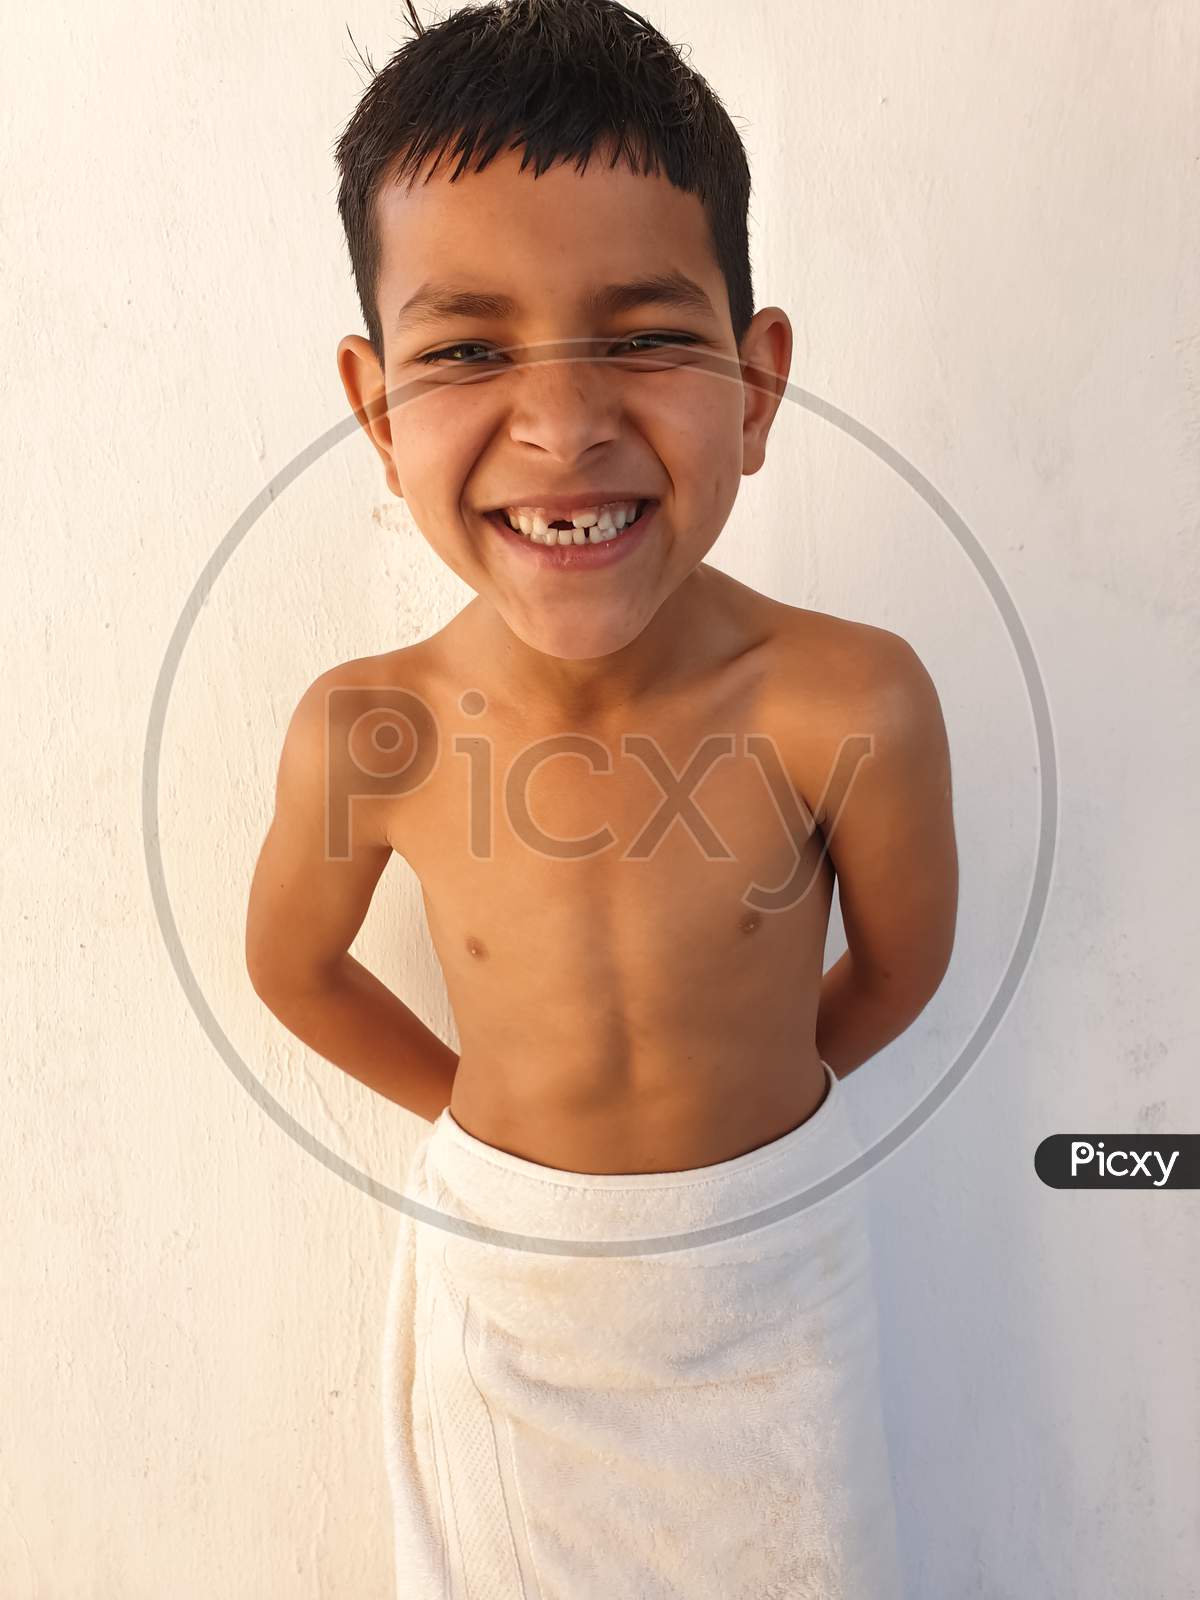 Studio shot of a shirtless little boy with funny big smile pose, A Indian kid showing his broken teeth with crazy smile, A small boy with wearing white towel and looking at camera.